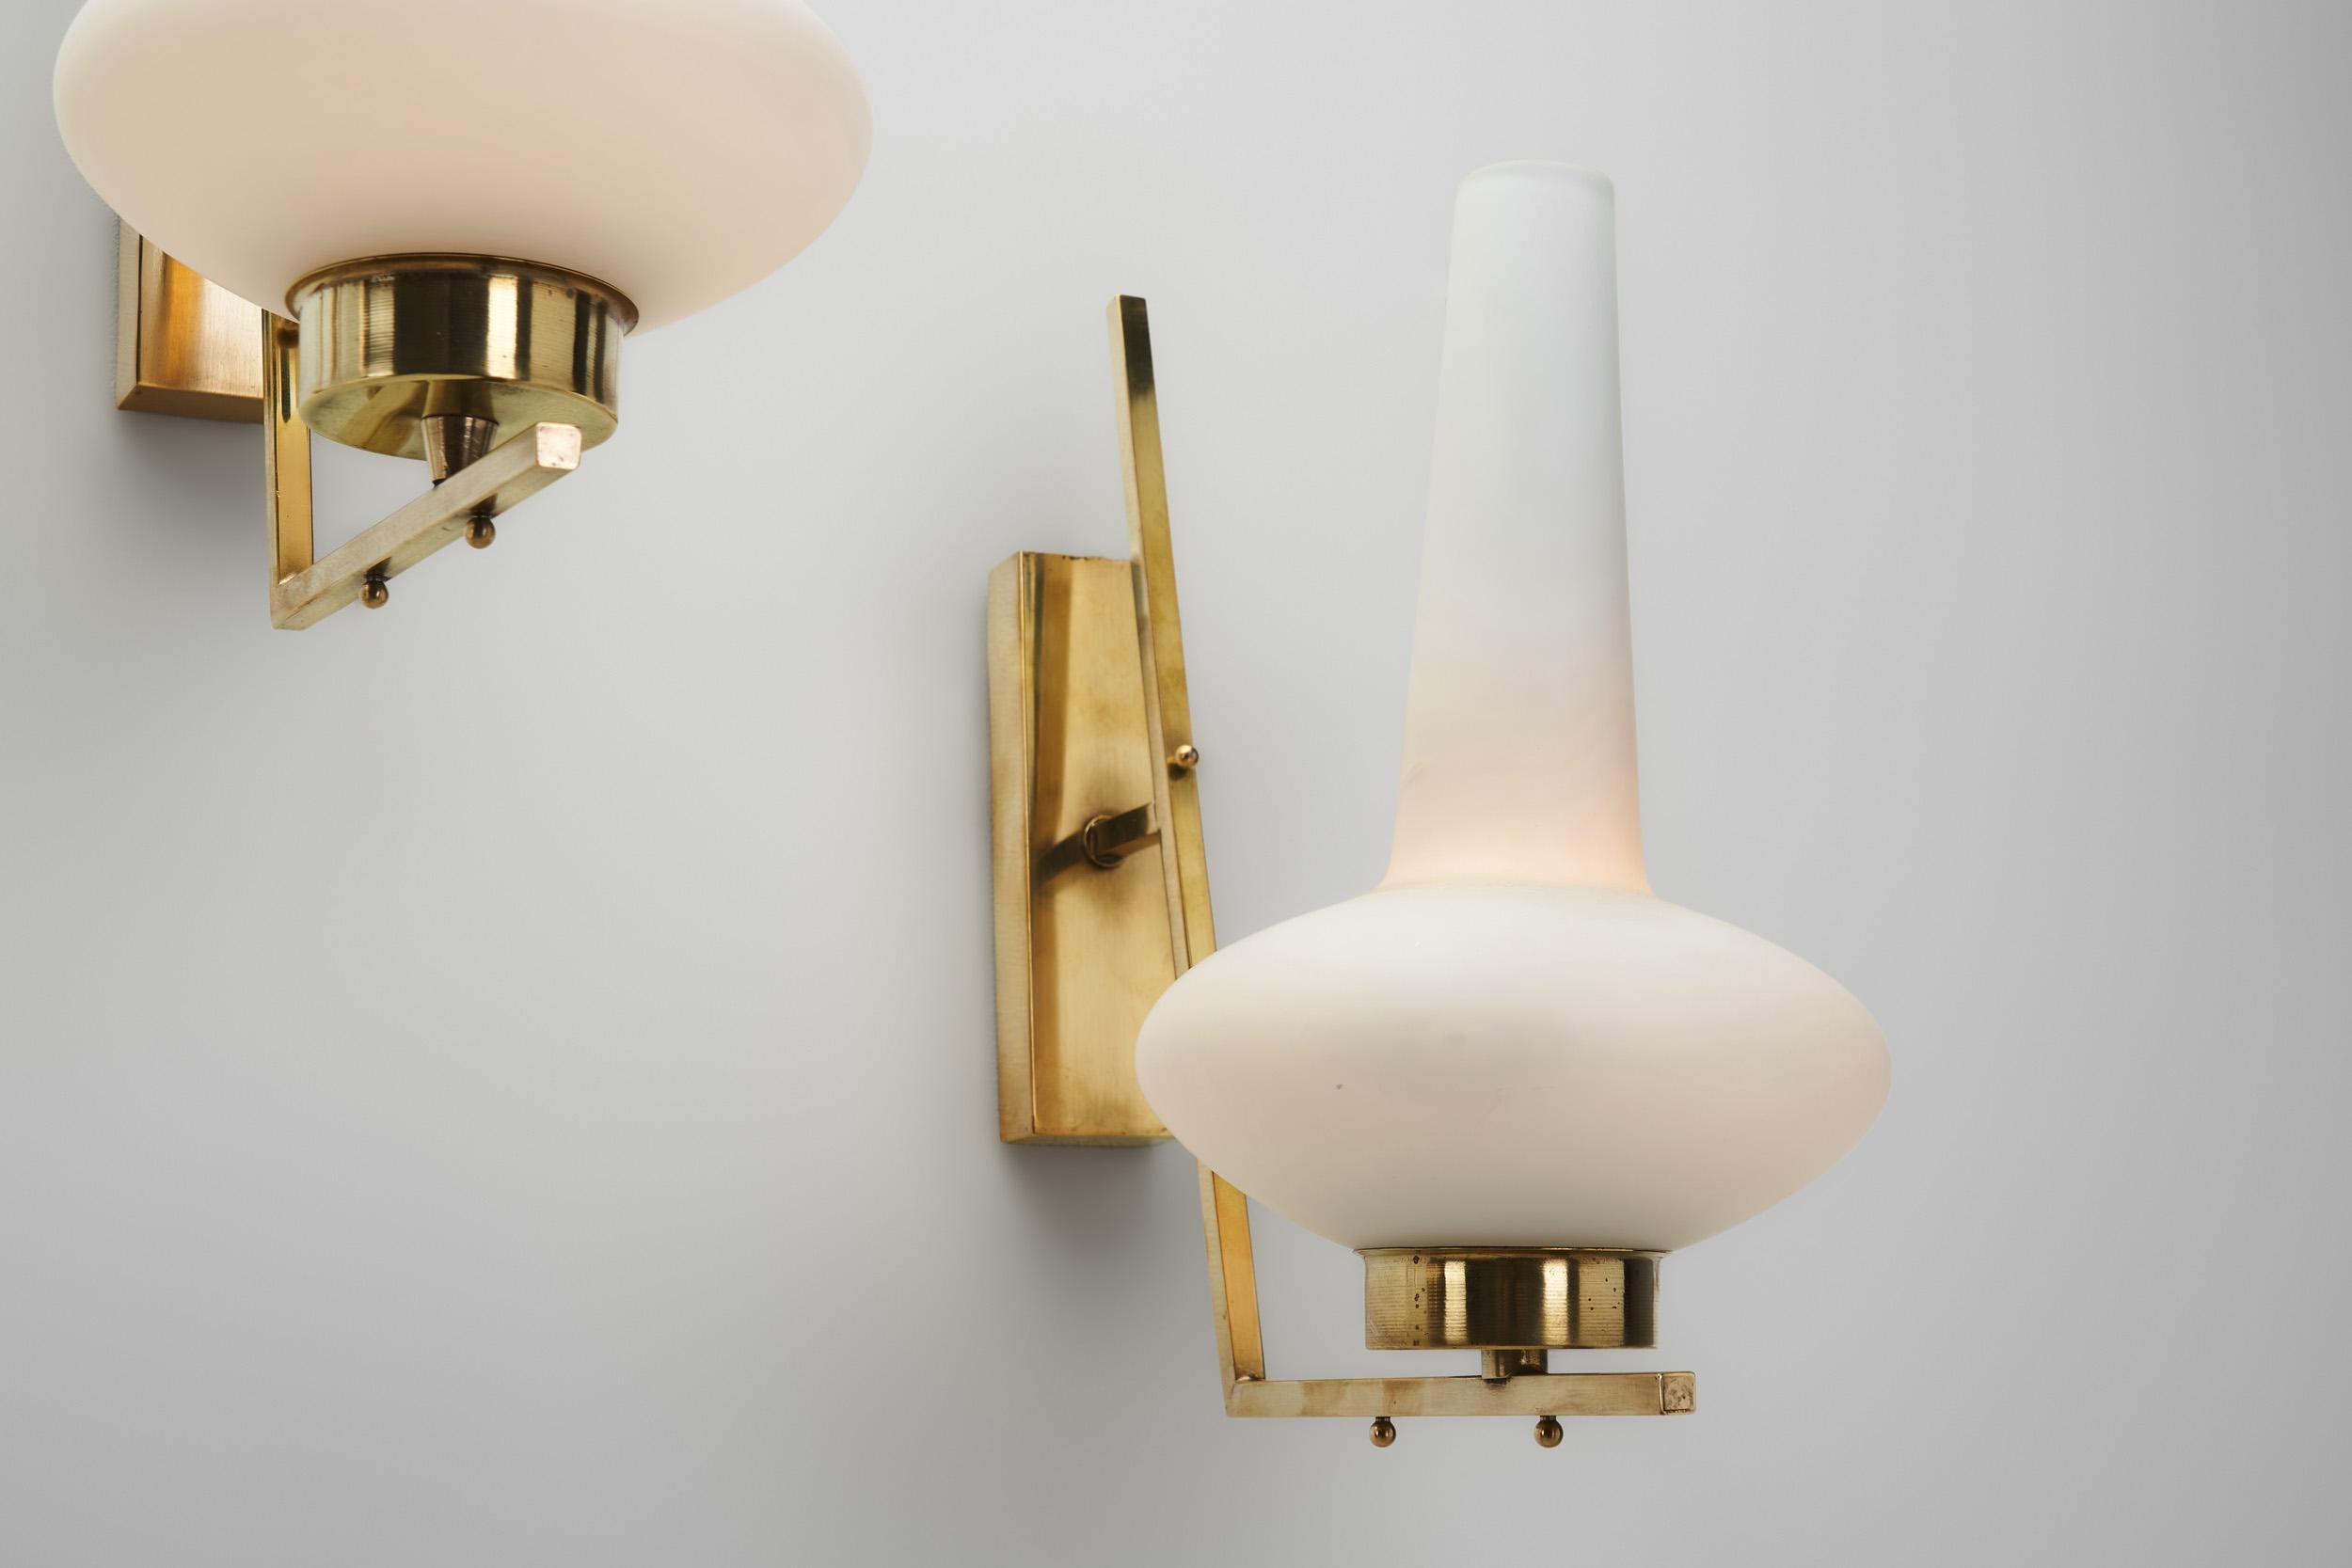 Italian Mid-Century Modern Brass Wall Lamps, Italy 1950s For Sale 6